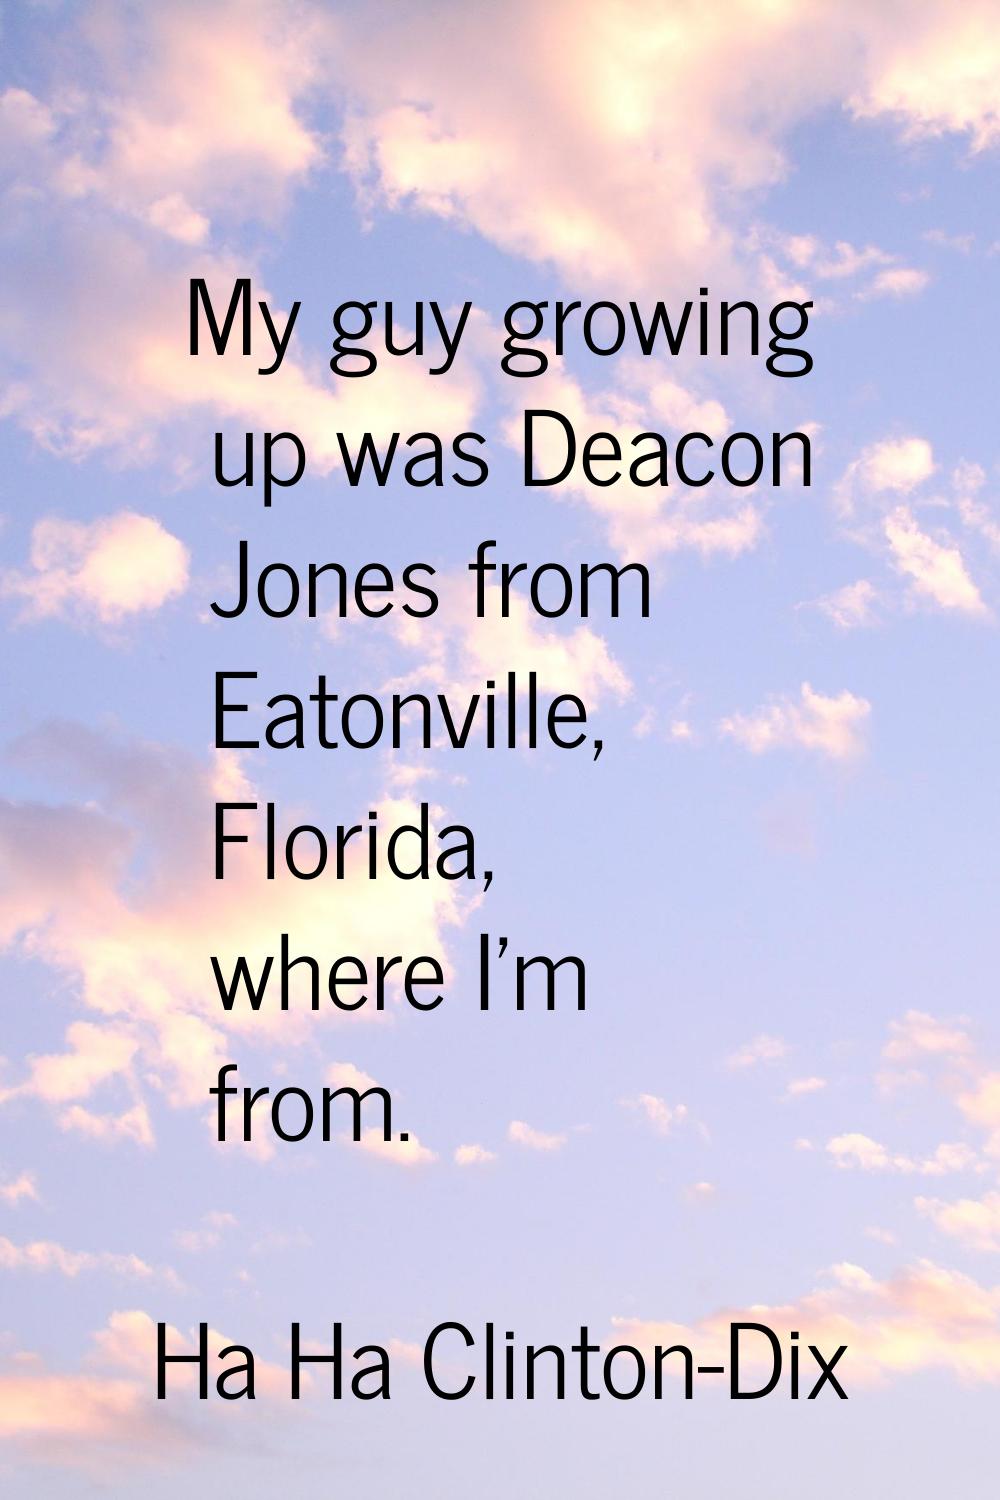 My guy growing up was Deacon Jones from Eatonville, Florida, where I'm from.